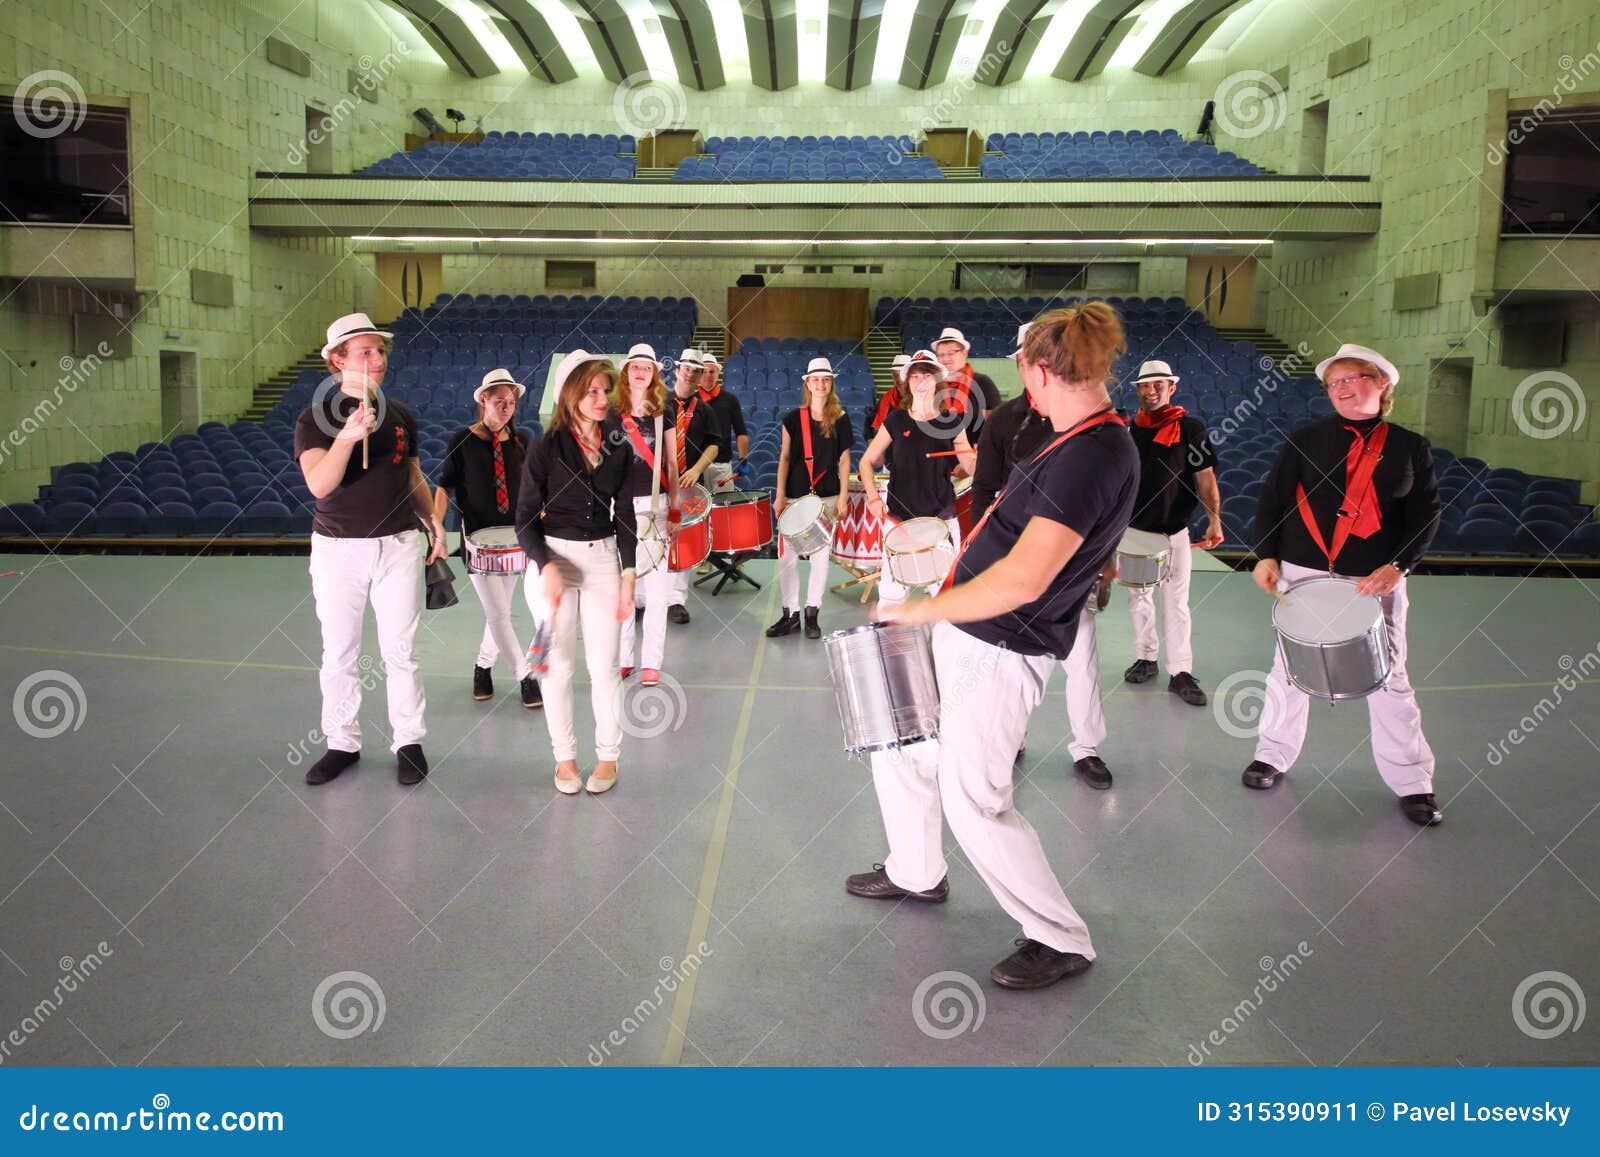 rehearsal of the musical group under the